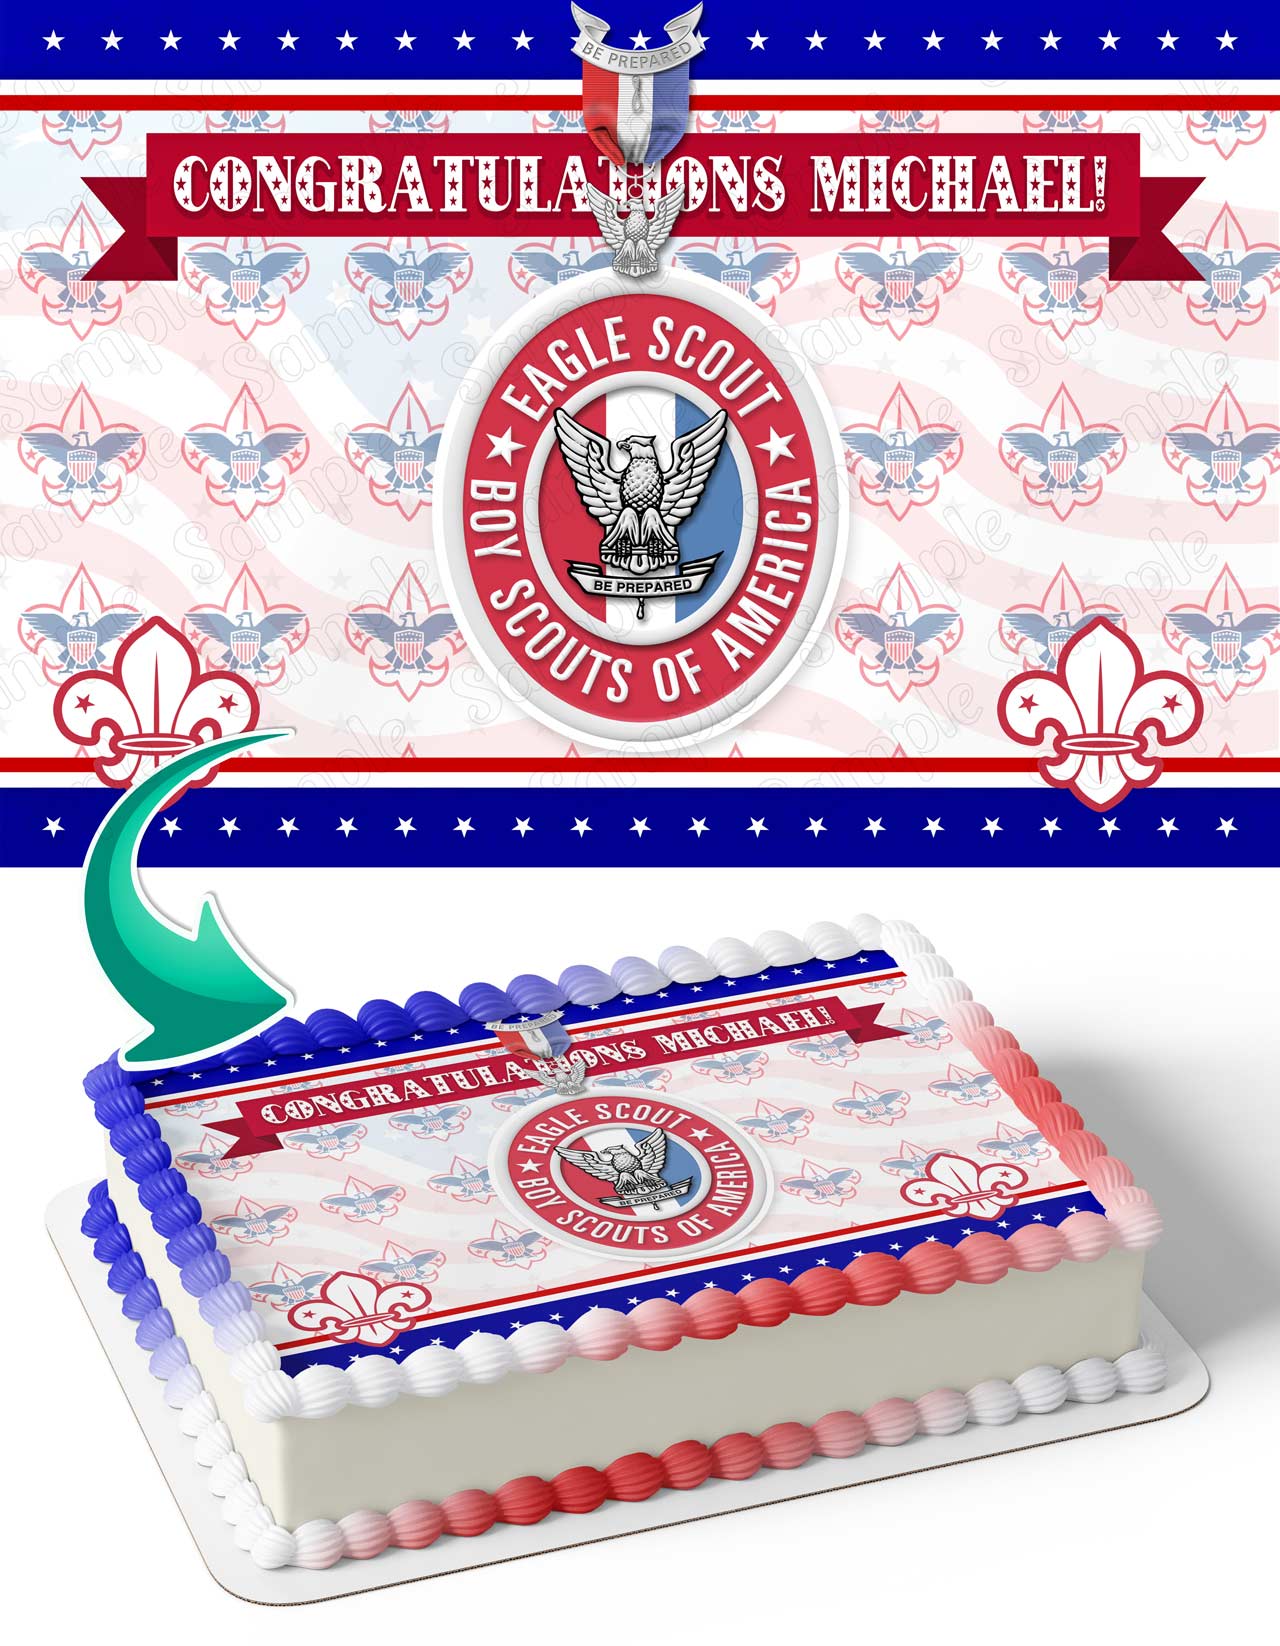 PRE-CUT Boy Scout Eagle Scout Ranks EDIBLE Cake Images, Court of Honor  Cake, Edible Scout Ranks for Cakes